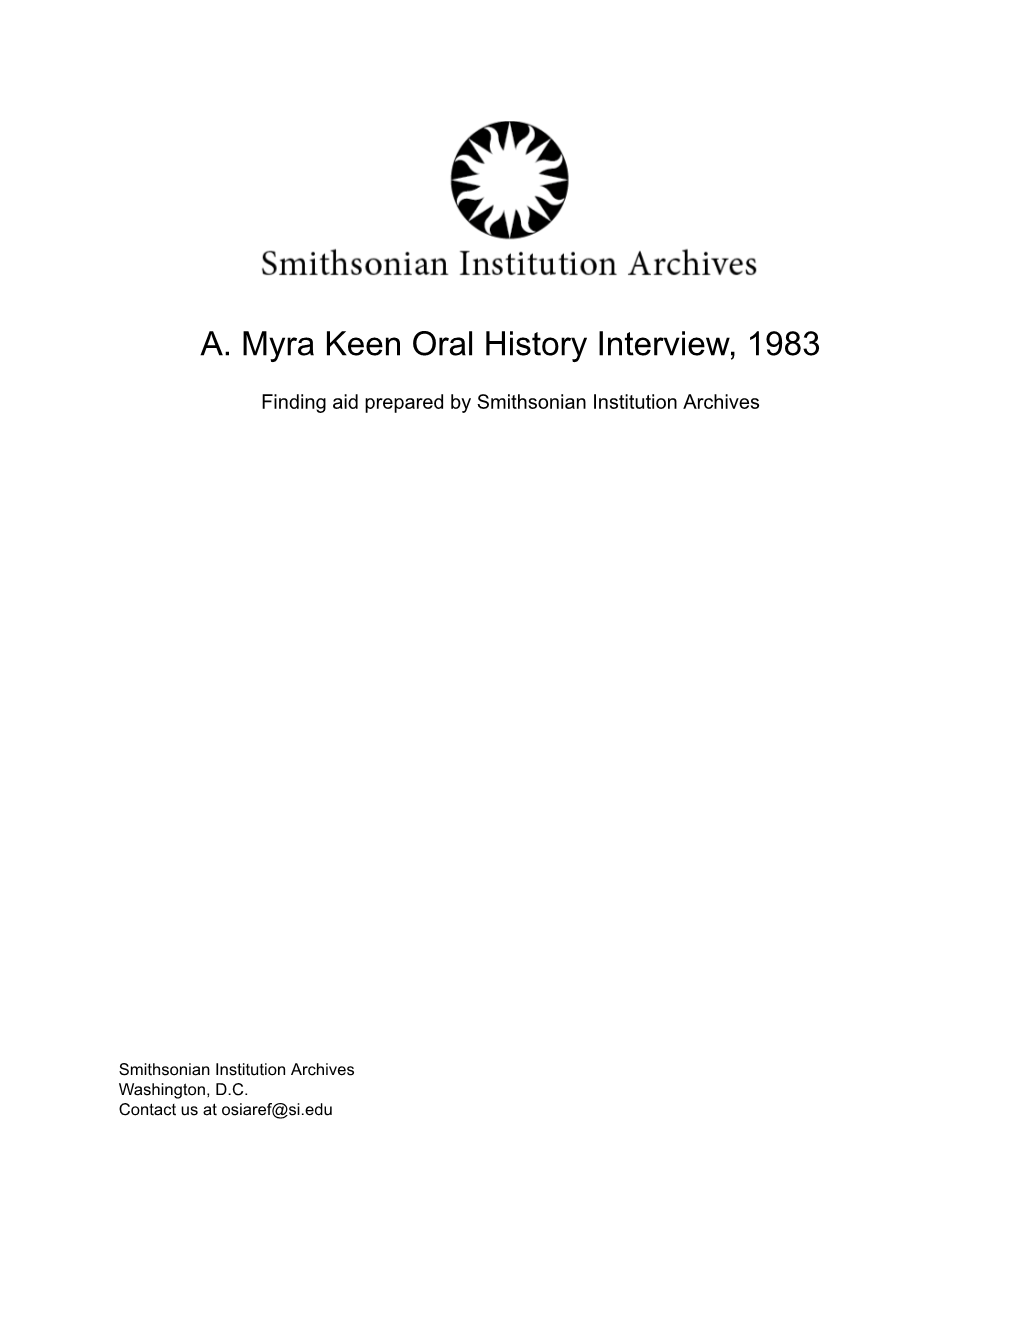 A. Myra Keen Oral History Interview, 1983